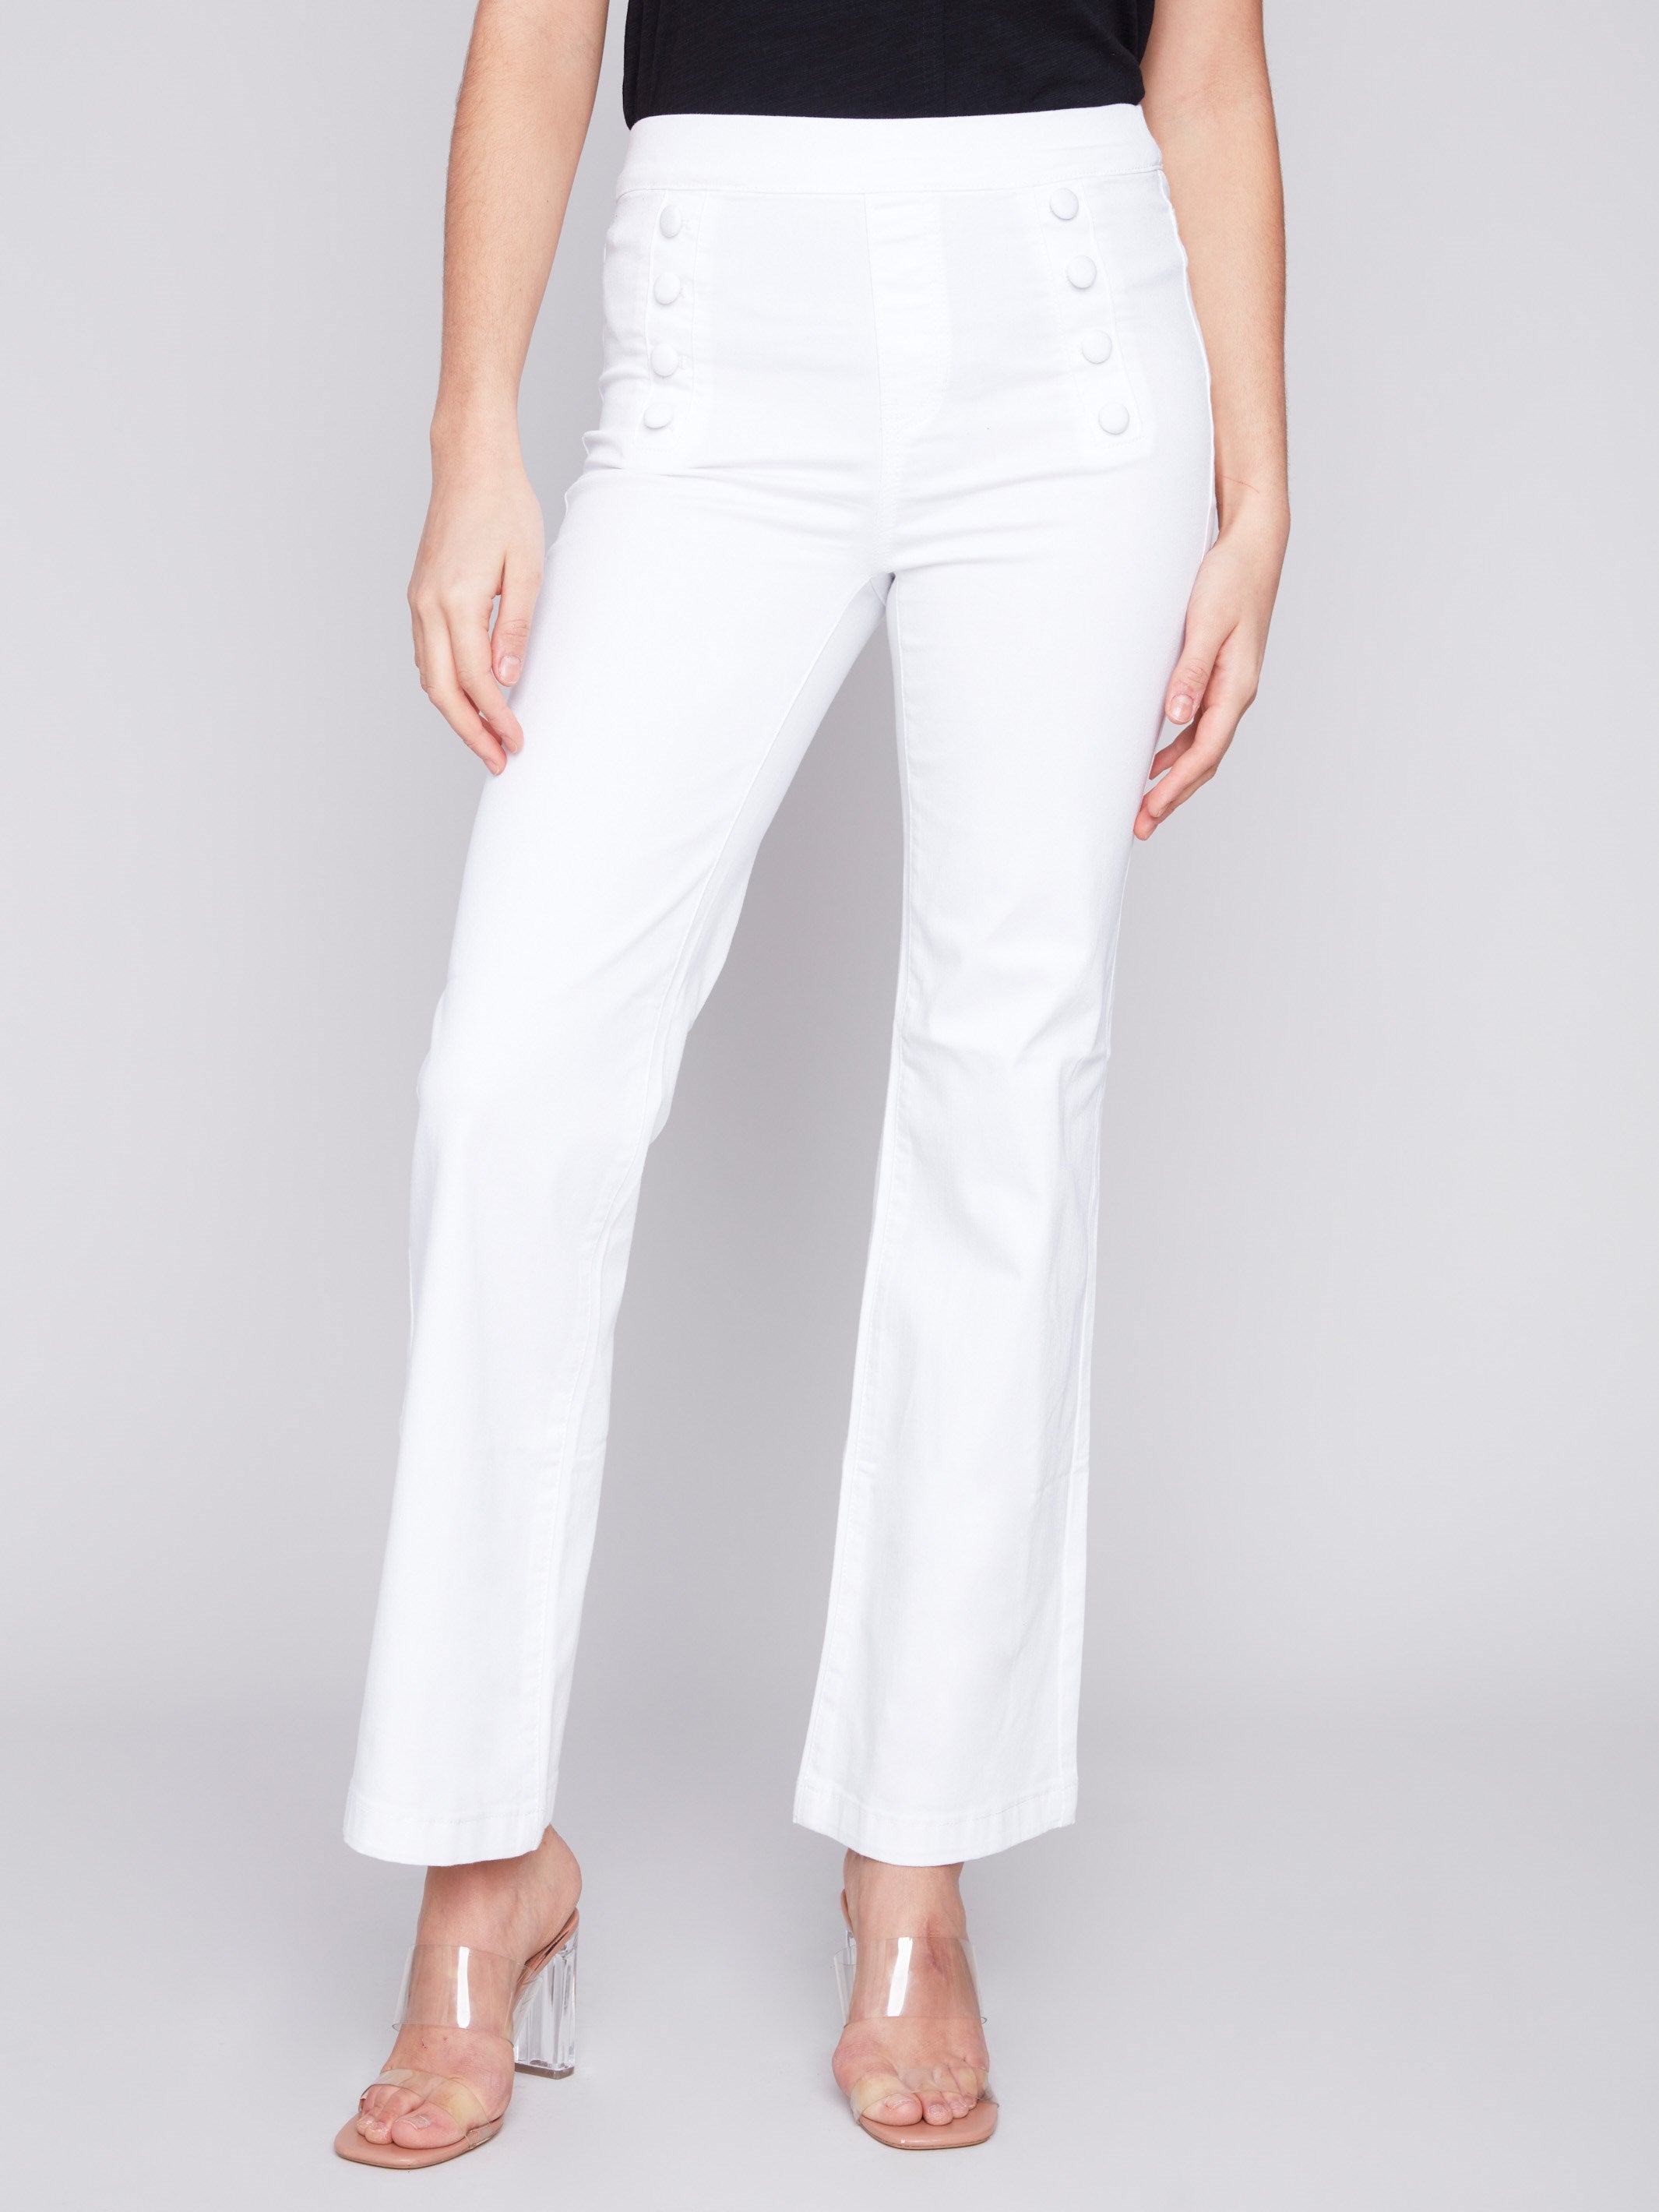 Charlie B Flare Twill Pants with Decorative Buttons - White - Image 2